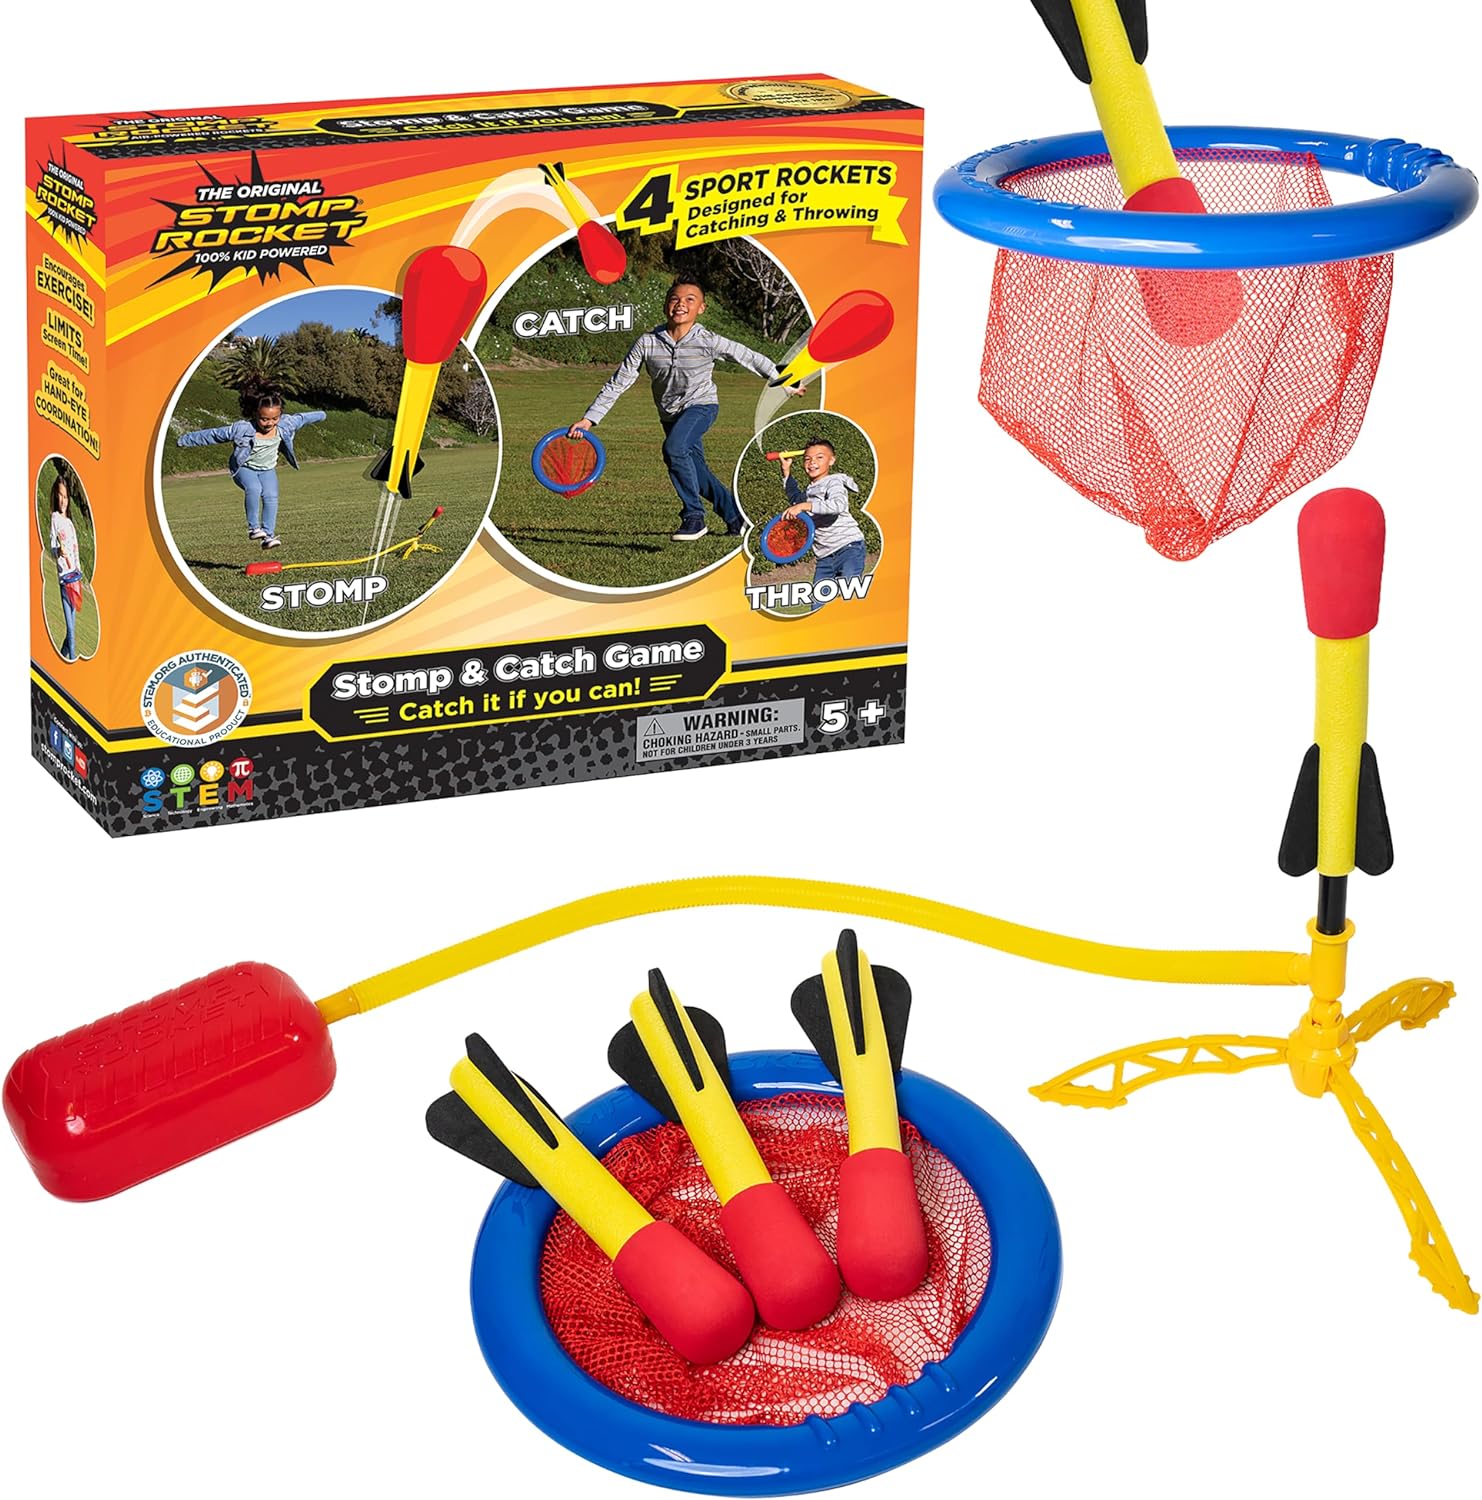 Stomp Rocket Stomp and Catch Rocket Launcher Game for Kids, Best Gifts For 8-Year-Old Boys 